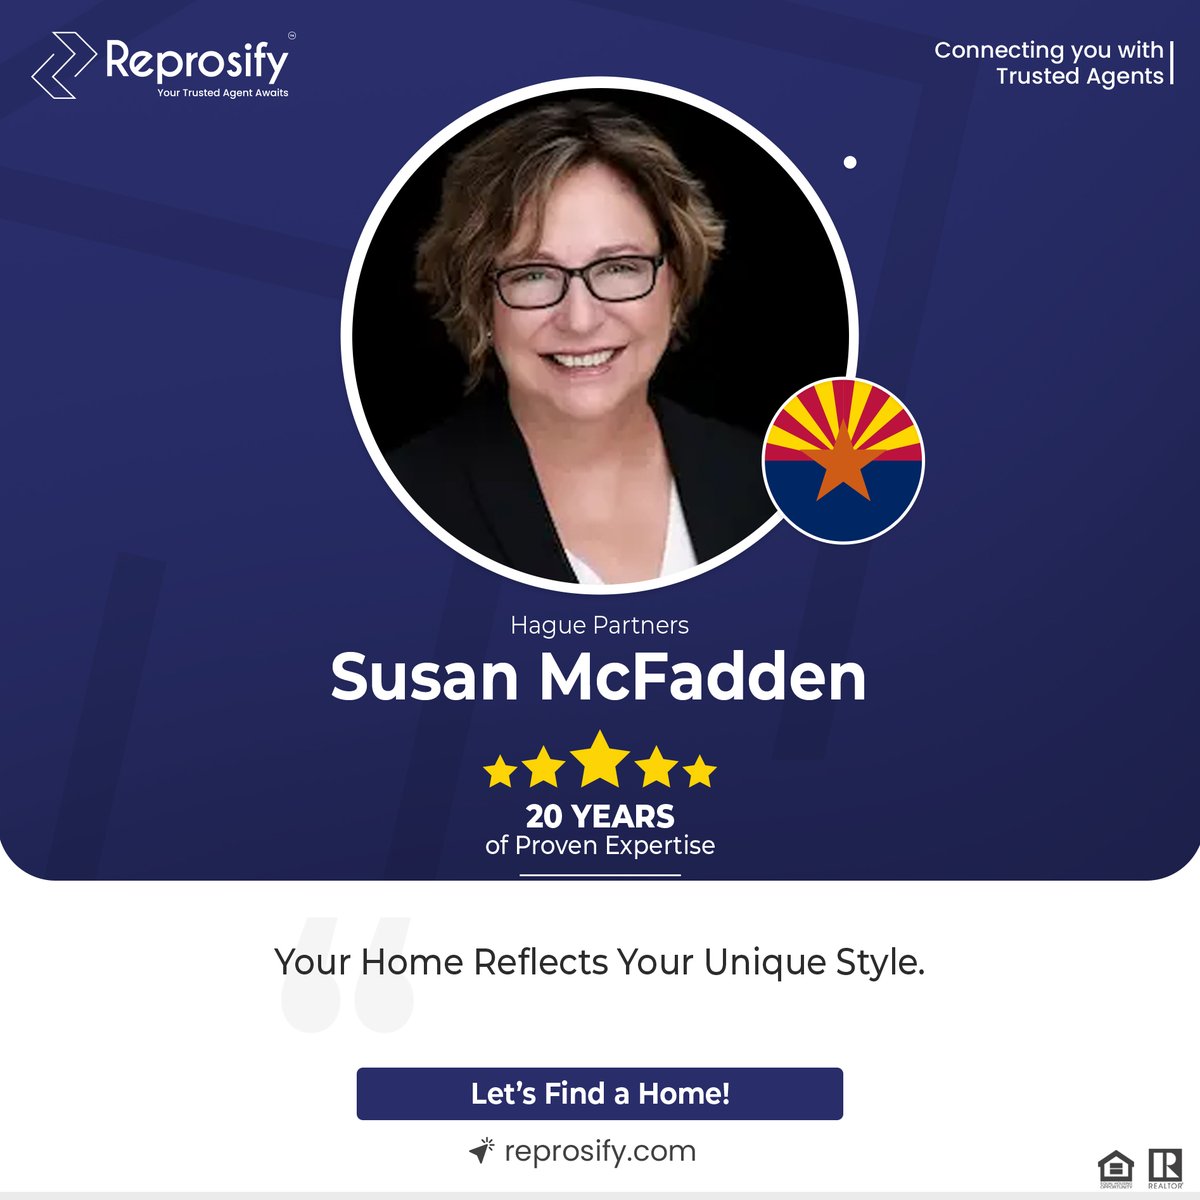 Guide your dream journey with Susan McFadden in Arizona! Commence your dream living – connect now.

👤agents.reprosify.com/susan-mcfadden
.
#Reprosify #AgentsReprosify #HaguePartners #SusanMcFadden #realestate #realtor #realestateagent #Broker #Arizonarealestate #Scottsdalerealestate